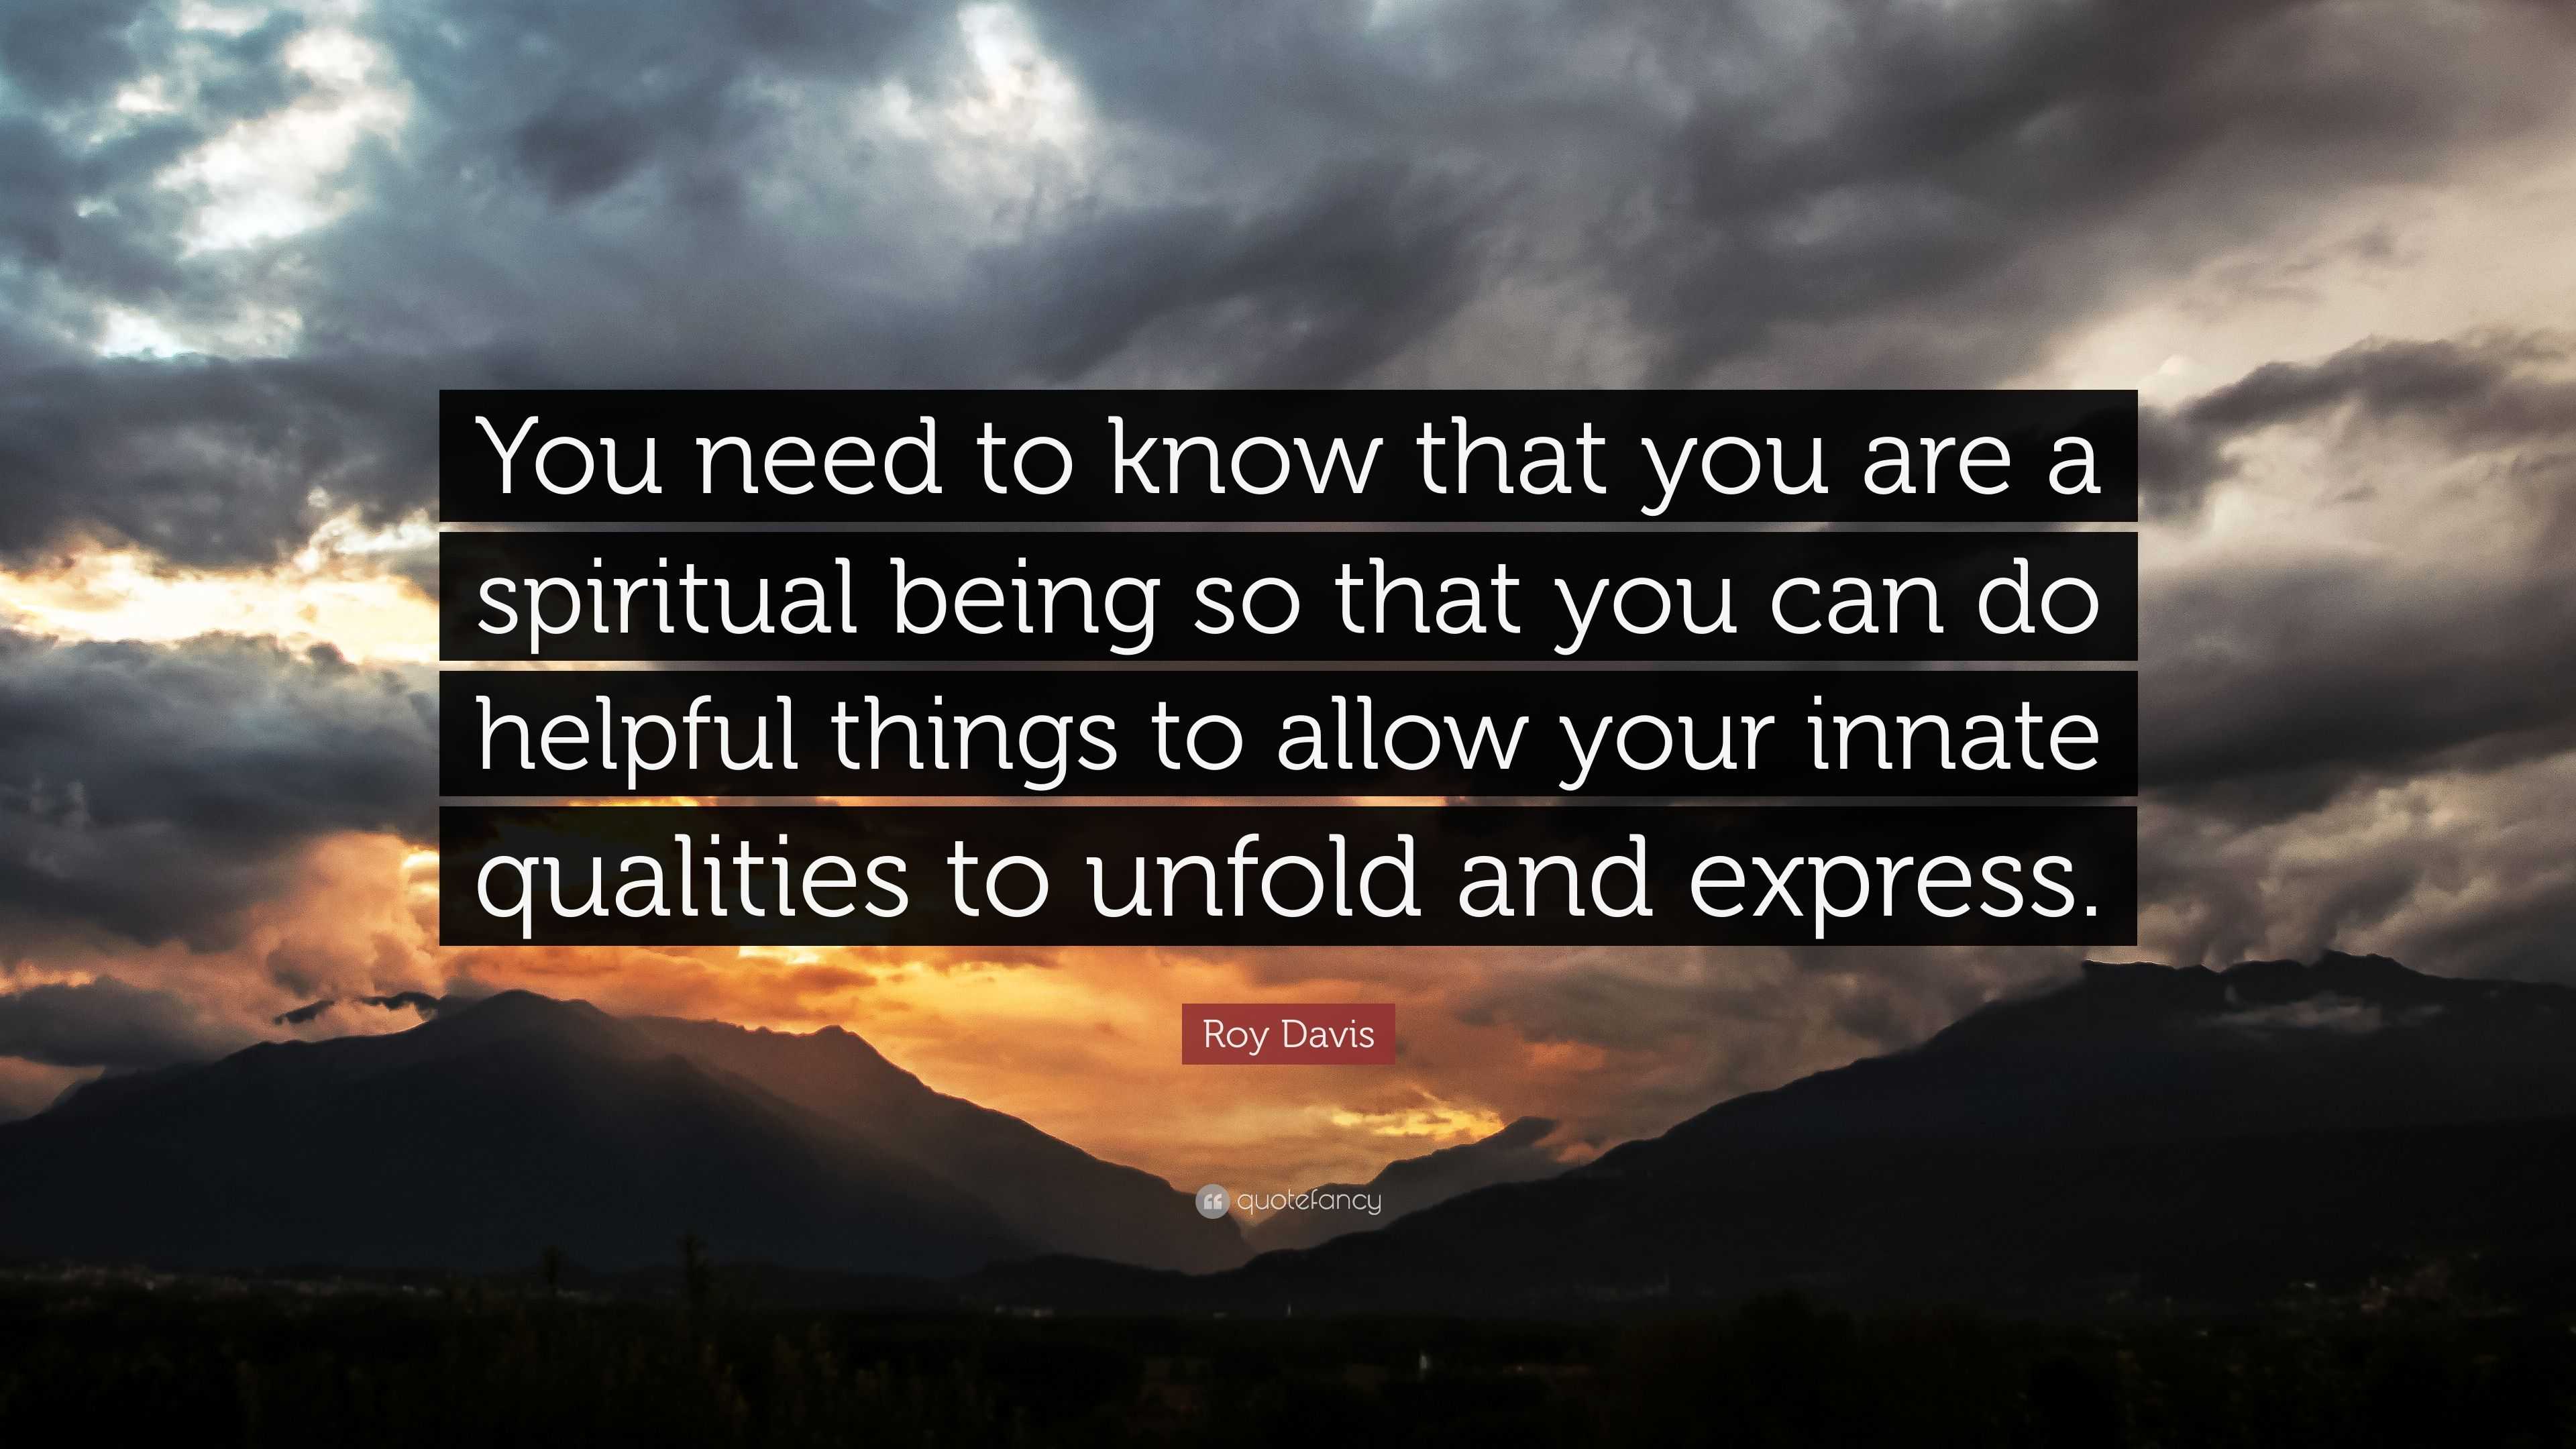 Roy Davis Quote: “You need to know that you are a spiritual being so ...